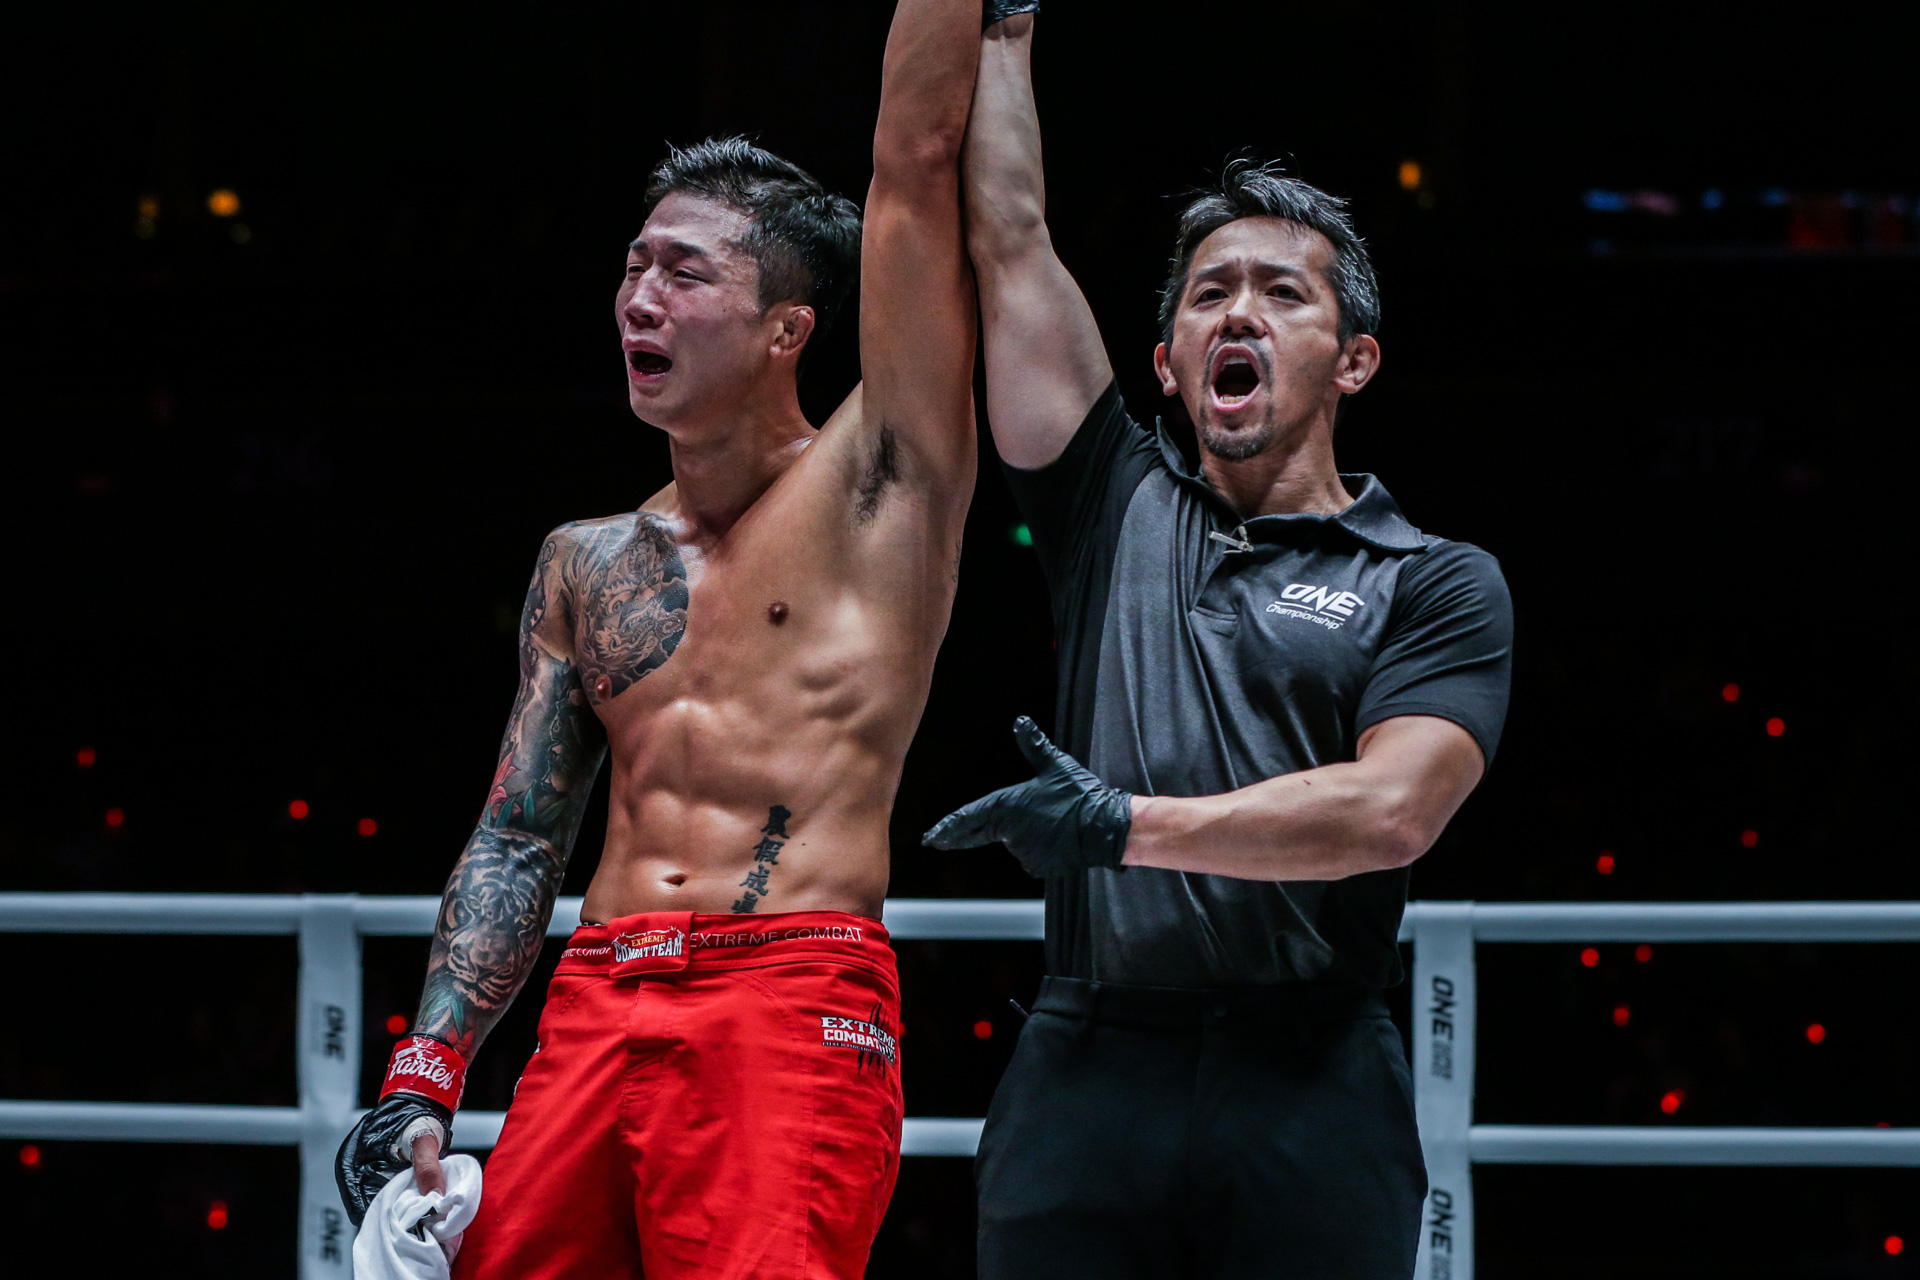 South Korea's Kim Jae Woong earns 1st ONE Championship win, knocks out Rafael Nunes at 'ONE: Masters of Fate' in Philippines